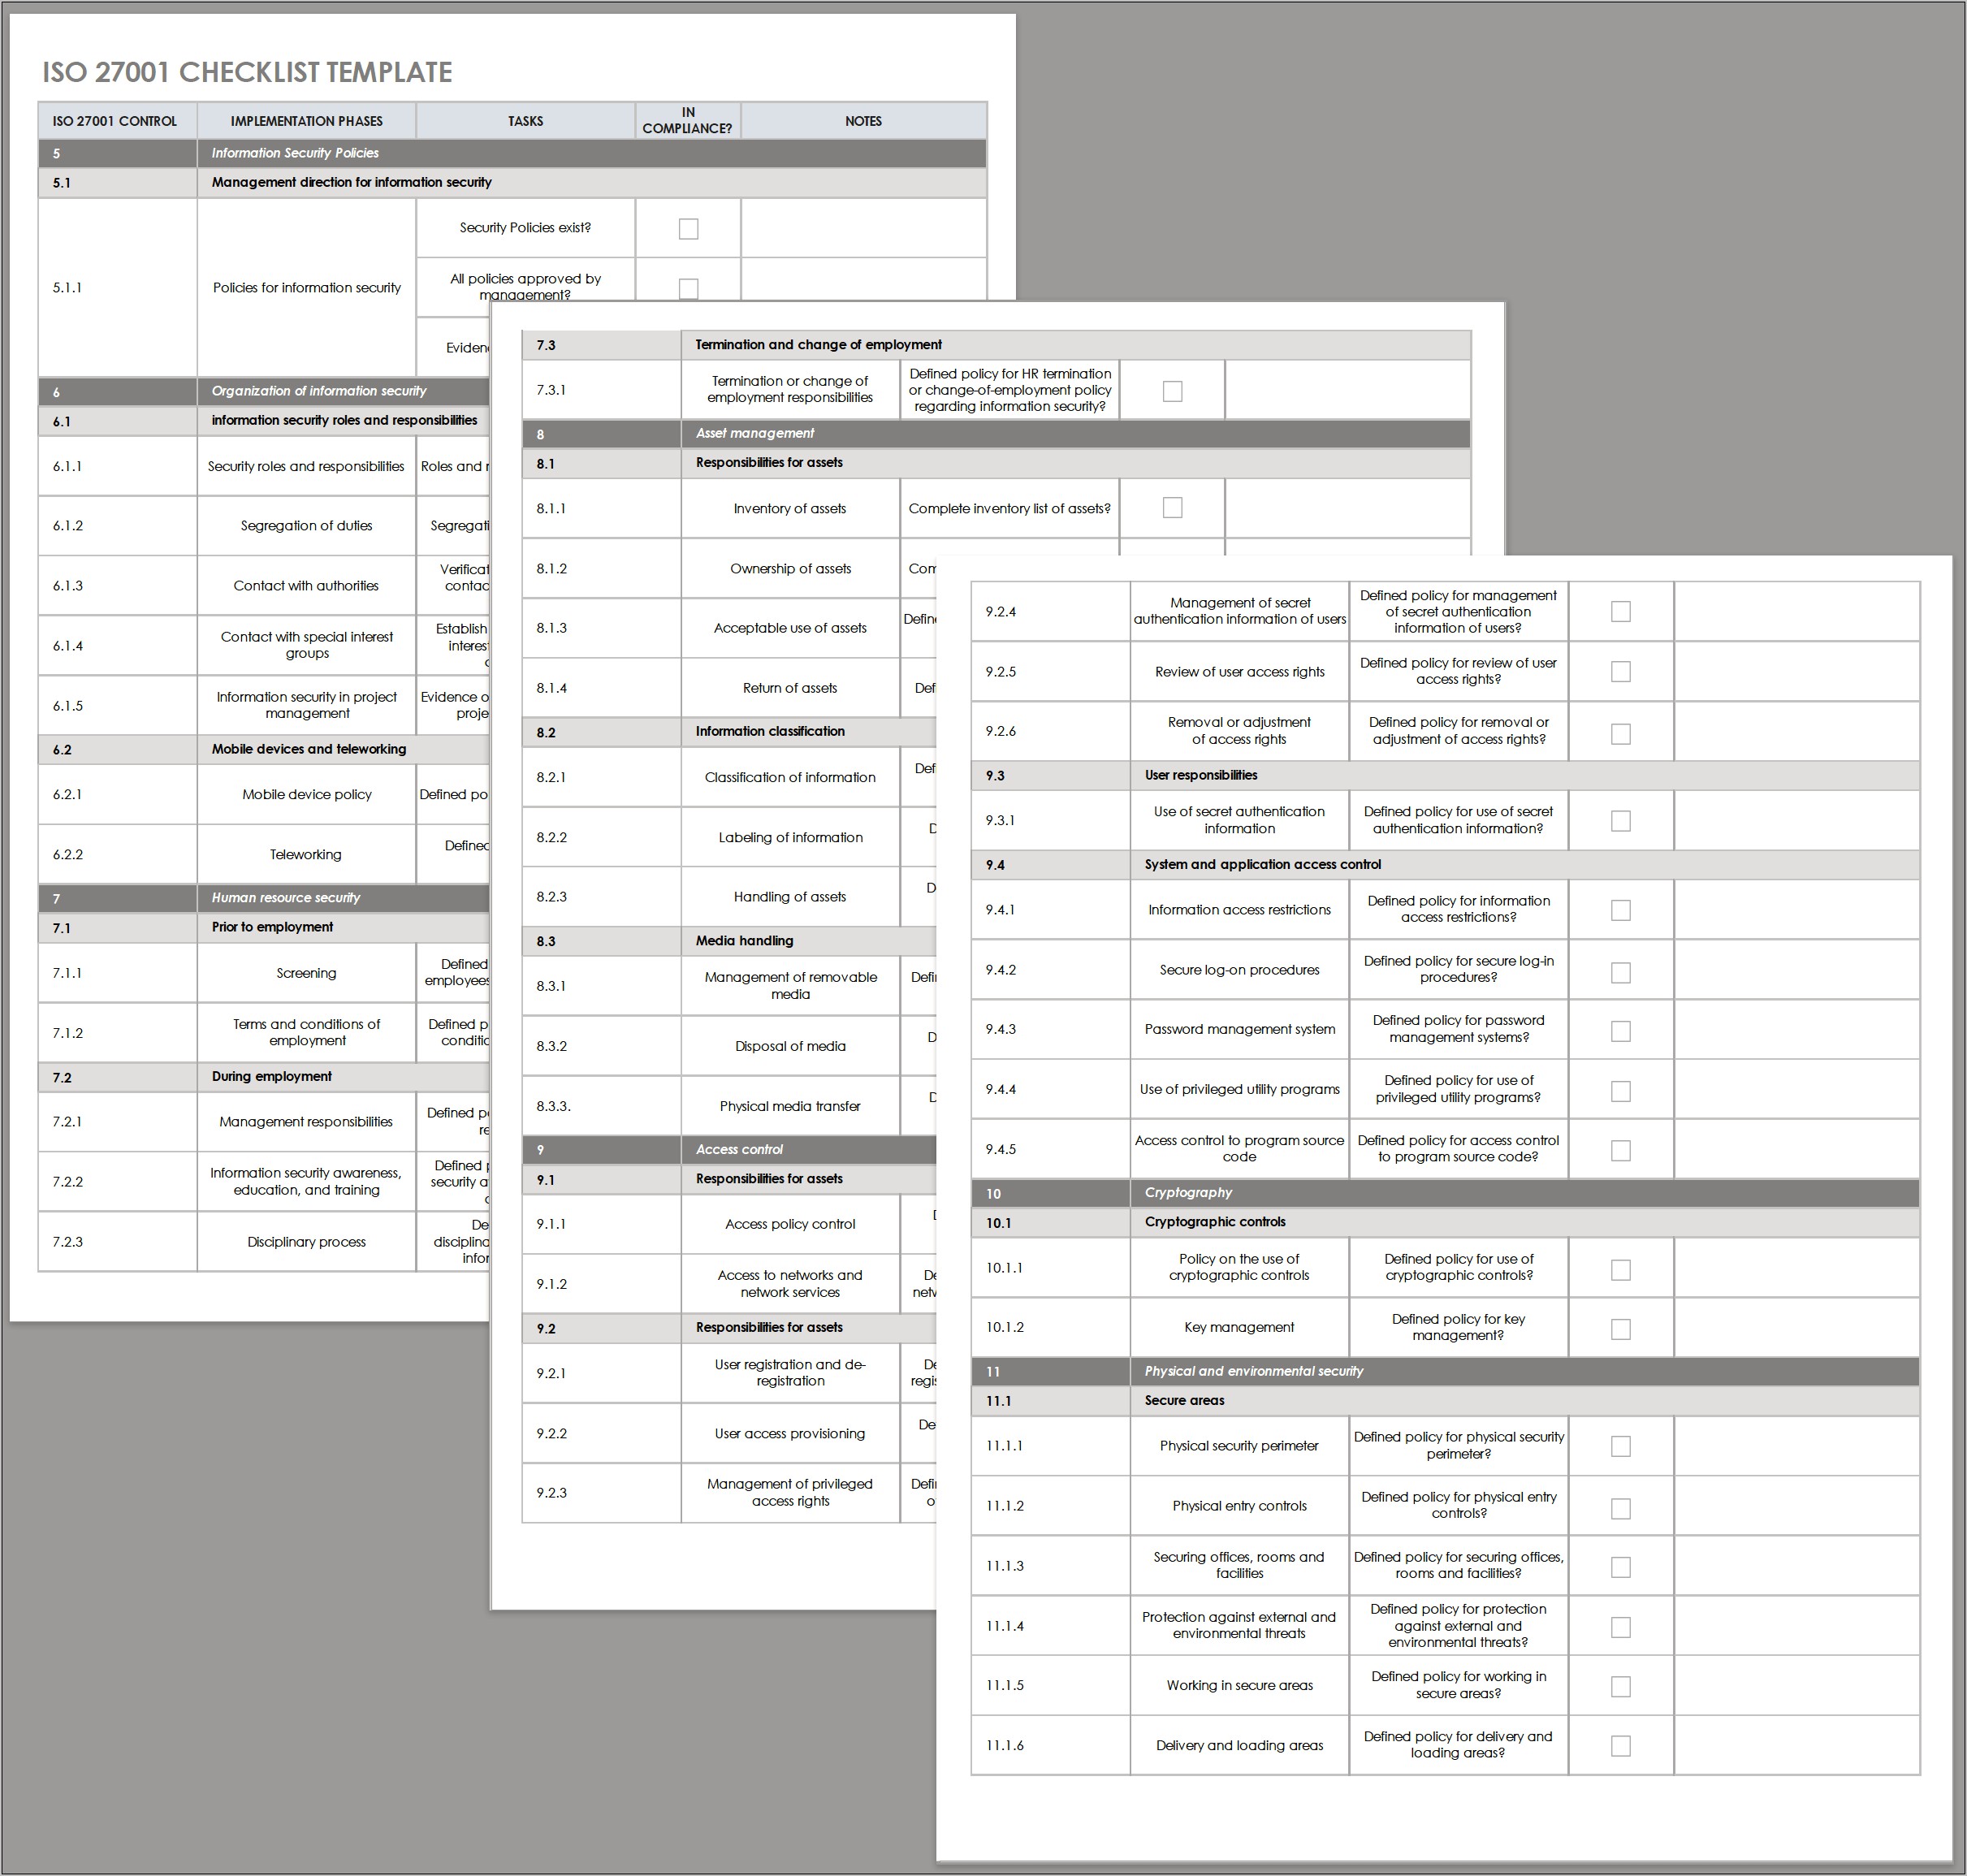 iso-9001-checklist-excel-template-free-resume-example-gallery